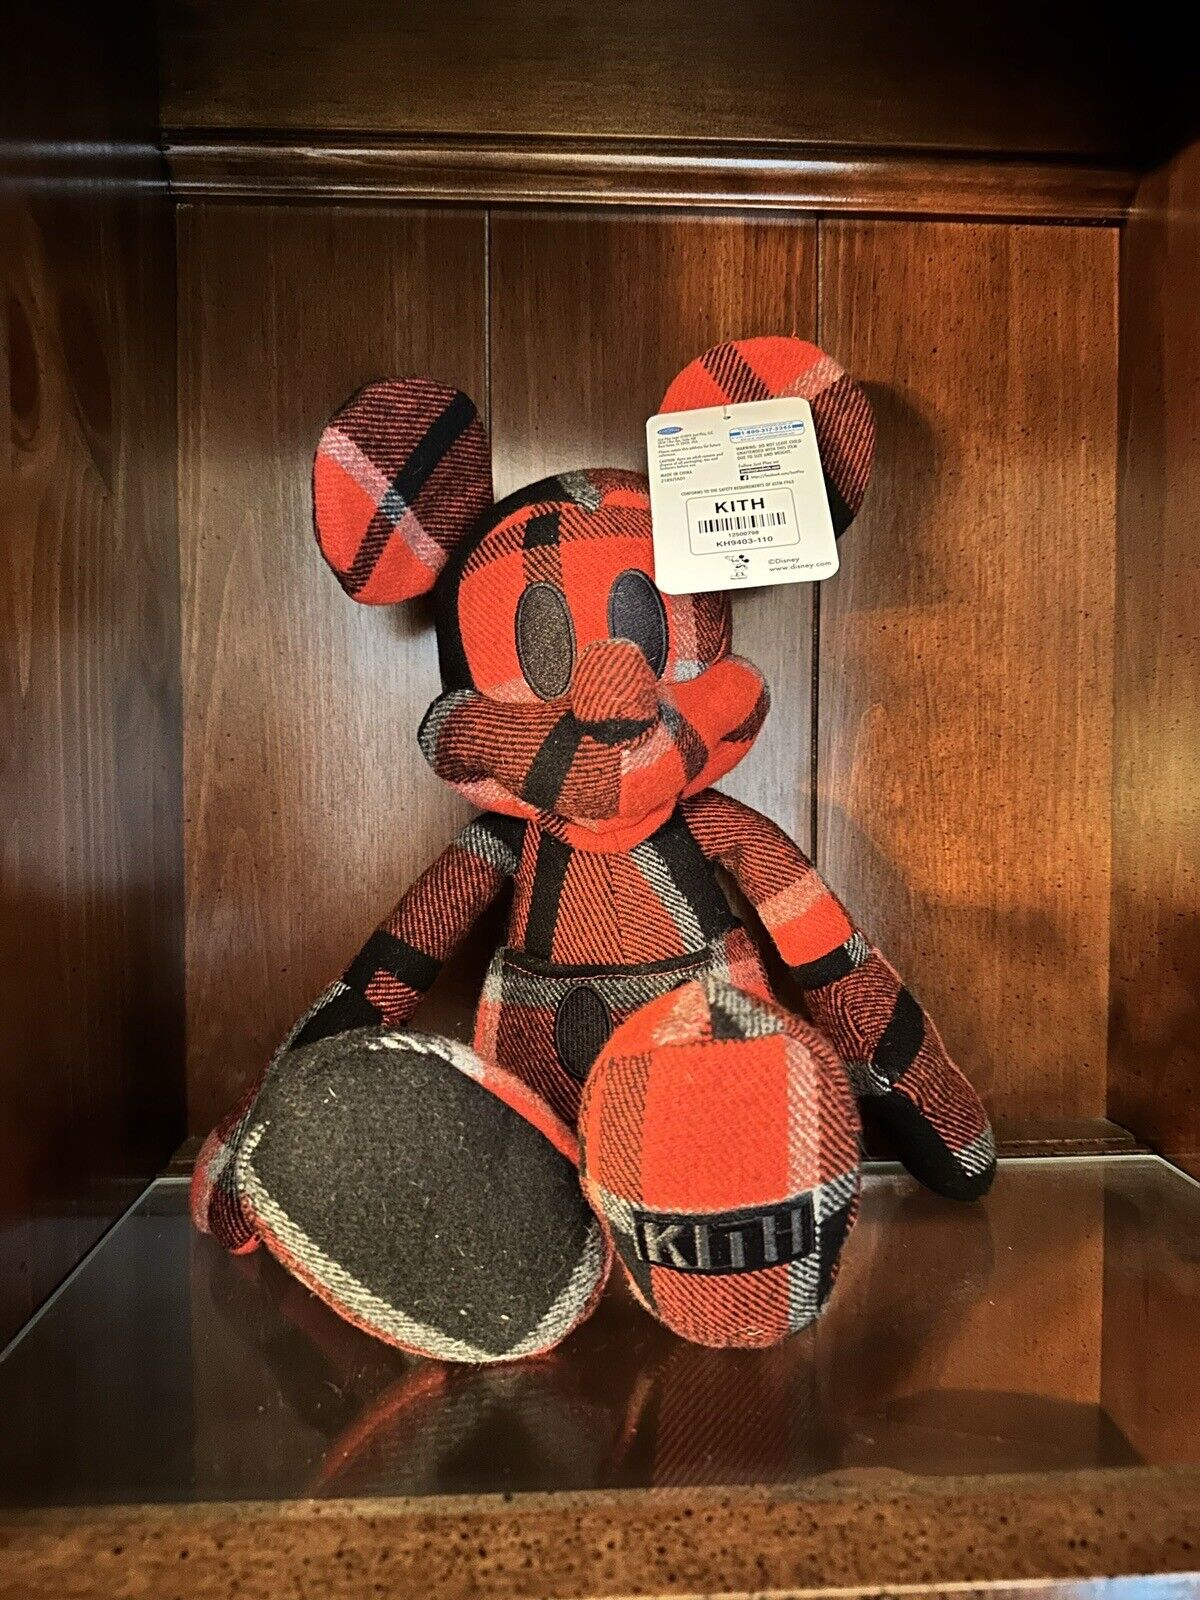 Kith x Disney Large Mickey Plush Plaid KH9403-110 In Hand Really To Ship